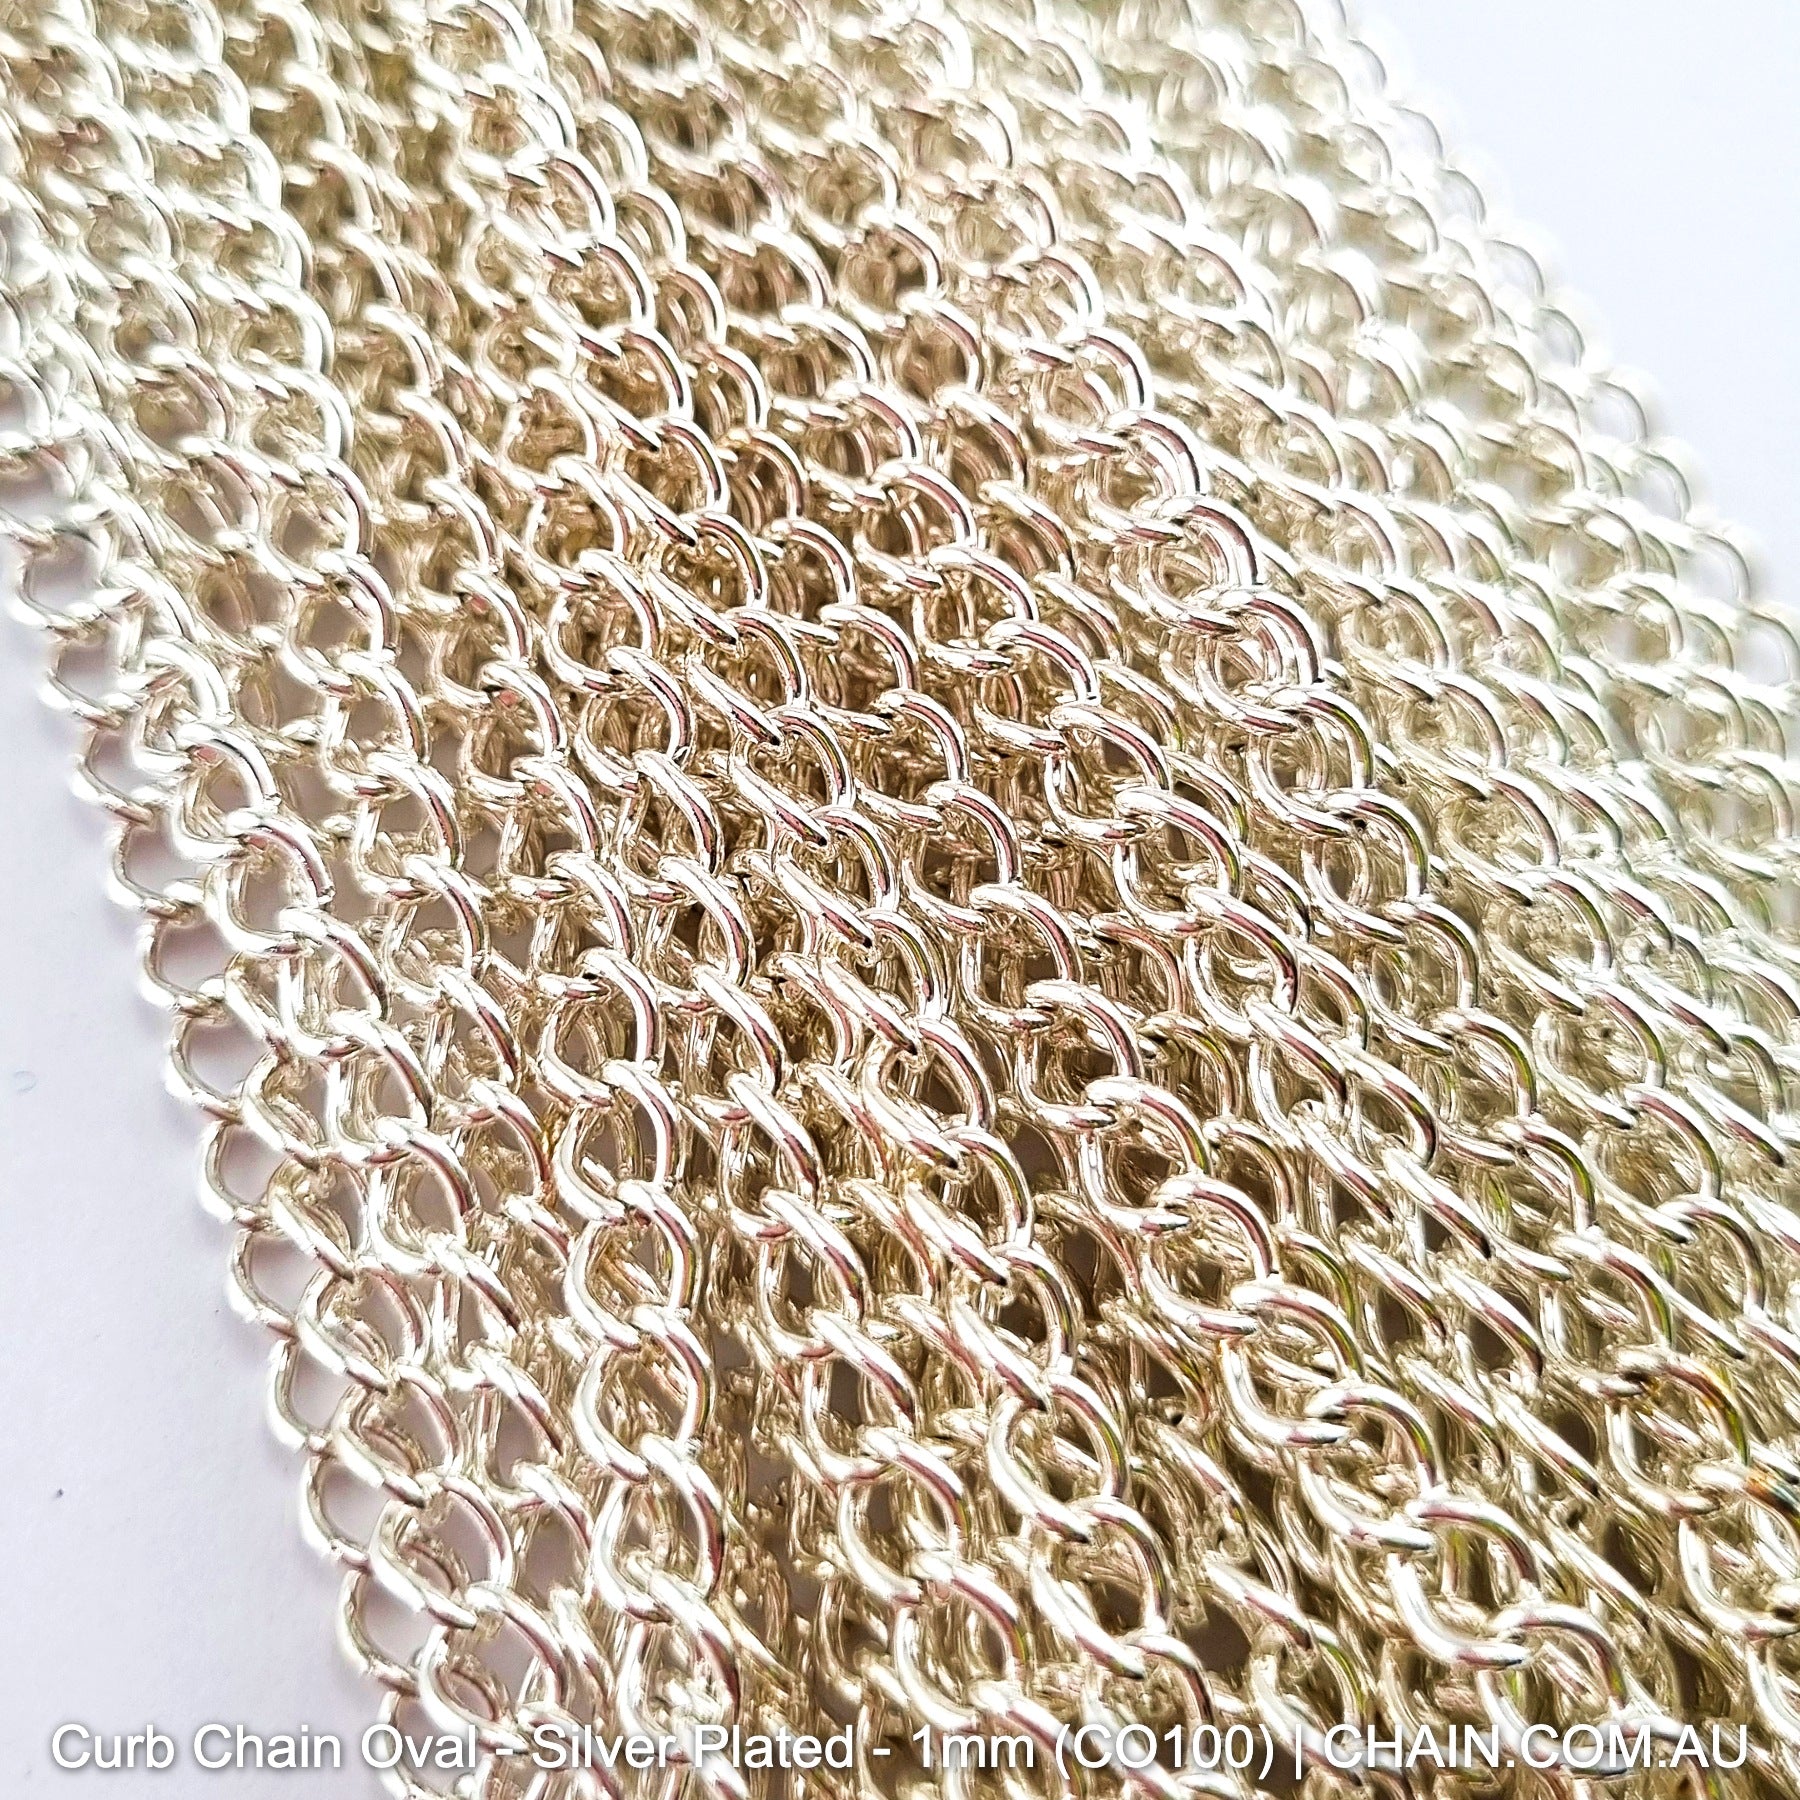 Oval Curb Chain - Silver Plated - Size: 1.0mm (CO100). Jewellery chain Australia. Shop chain online chain.com.au